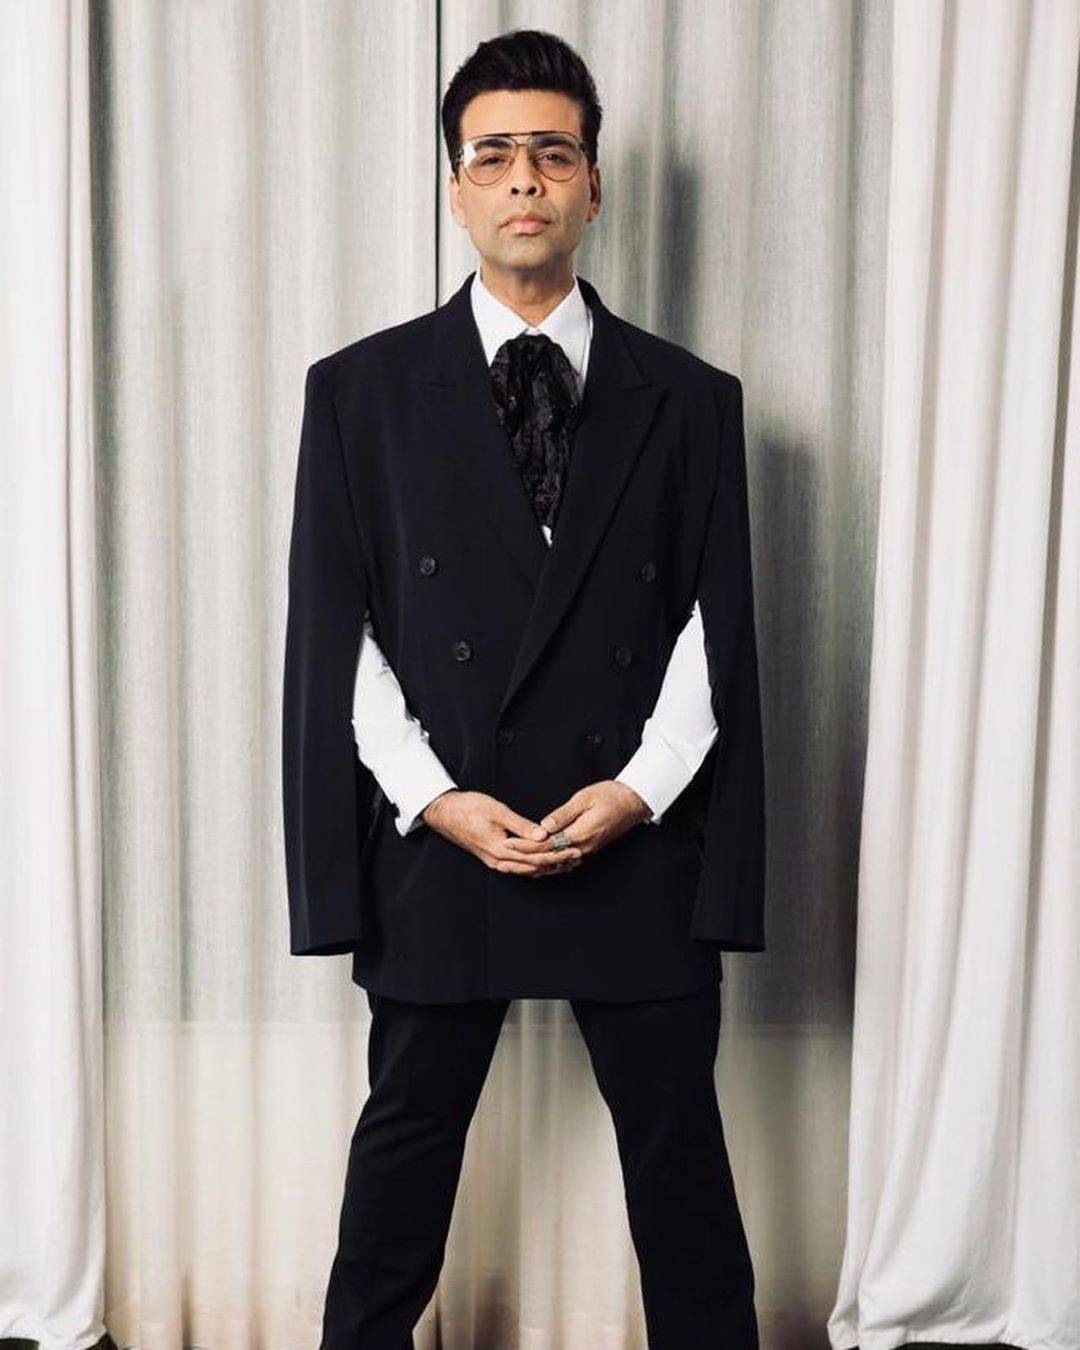 Filmmaker Karan Johar, who has been turning heads at the 2019 Indian Film Festival of Melbourne as much as any other star, has impressed us in some dapper suits. - Fashion Models